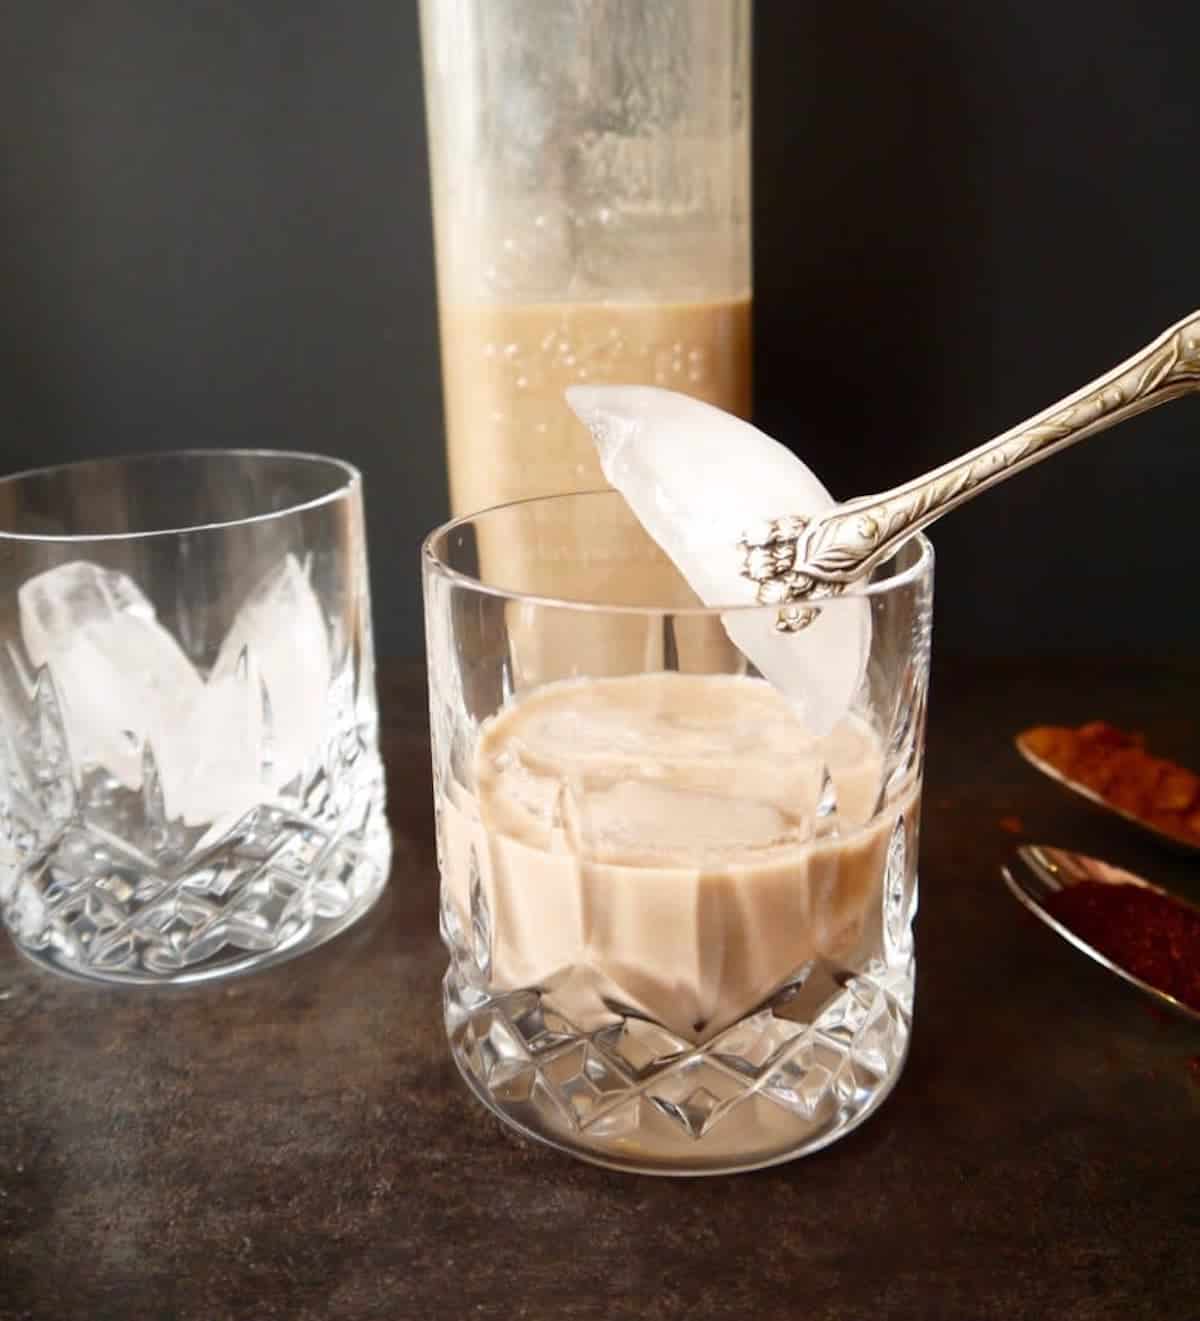 Dairy free baileys in a glass with ice being put into the glass.